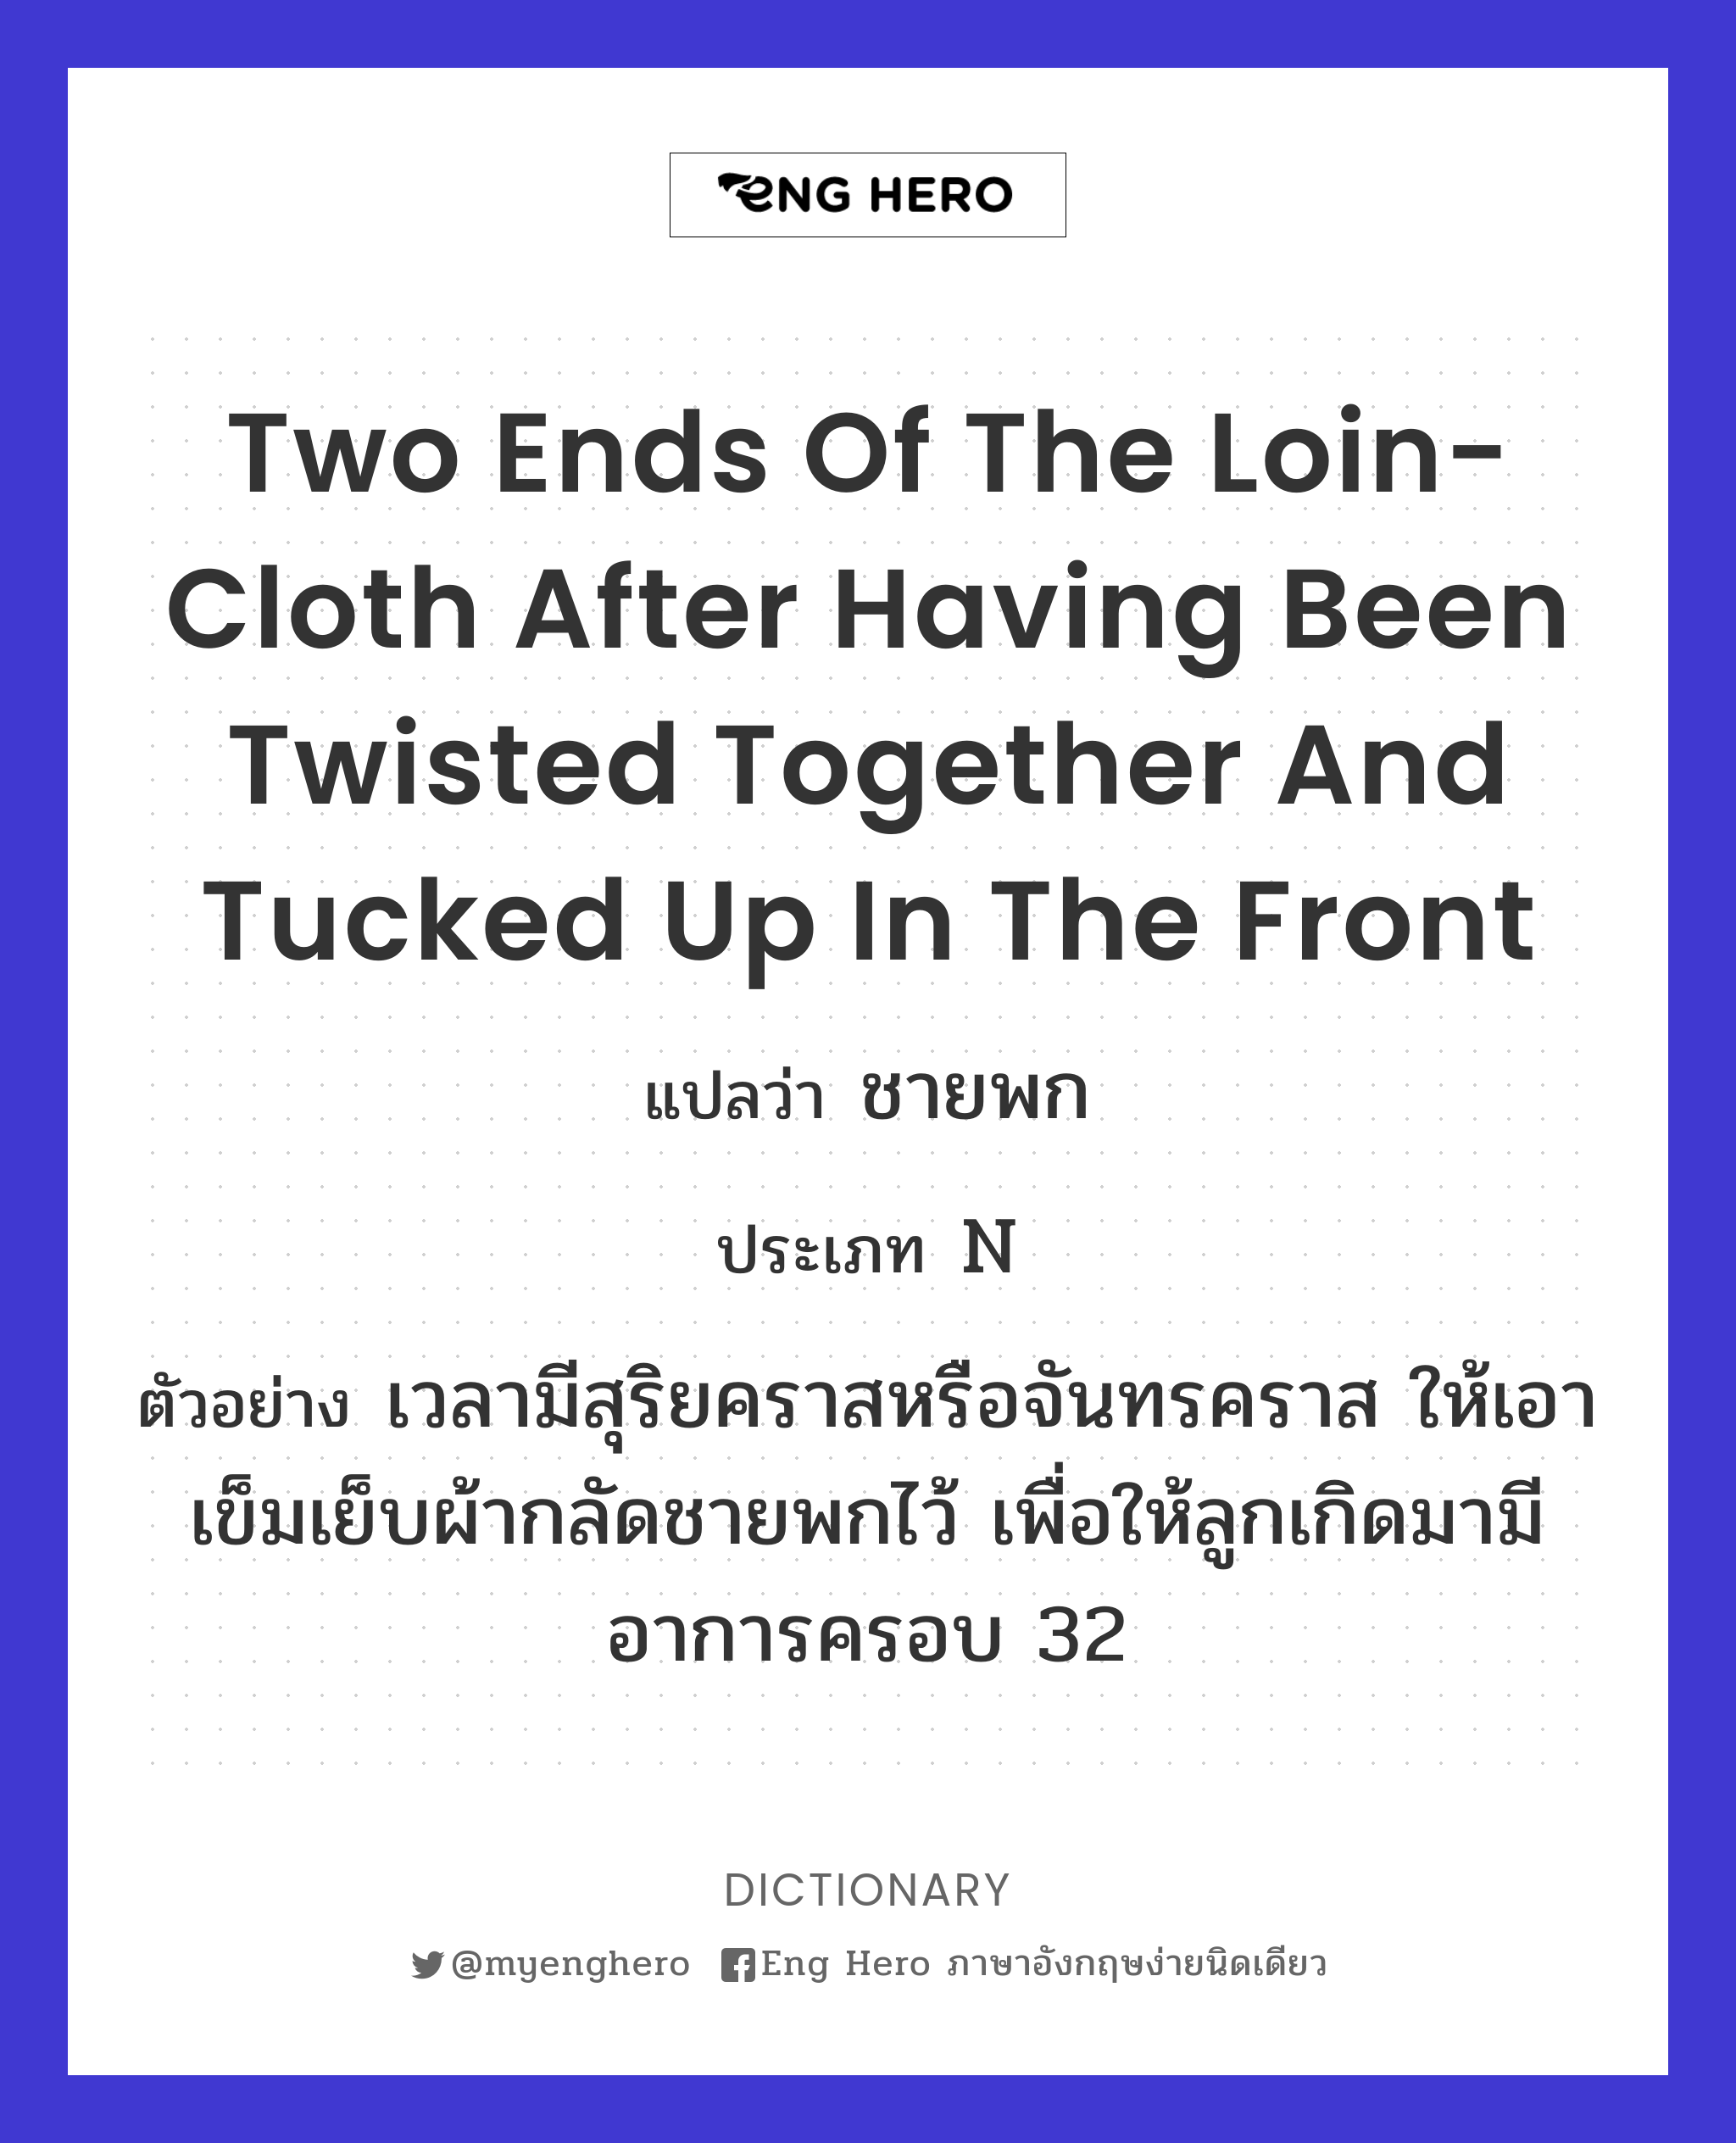 two ends of the loin-cloth after having been twisted together and tucked up in the front